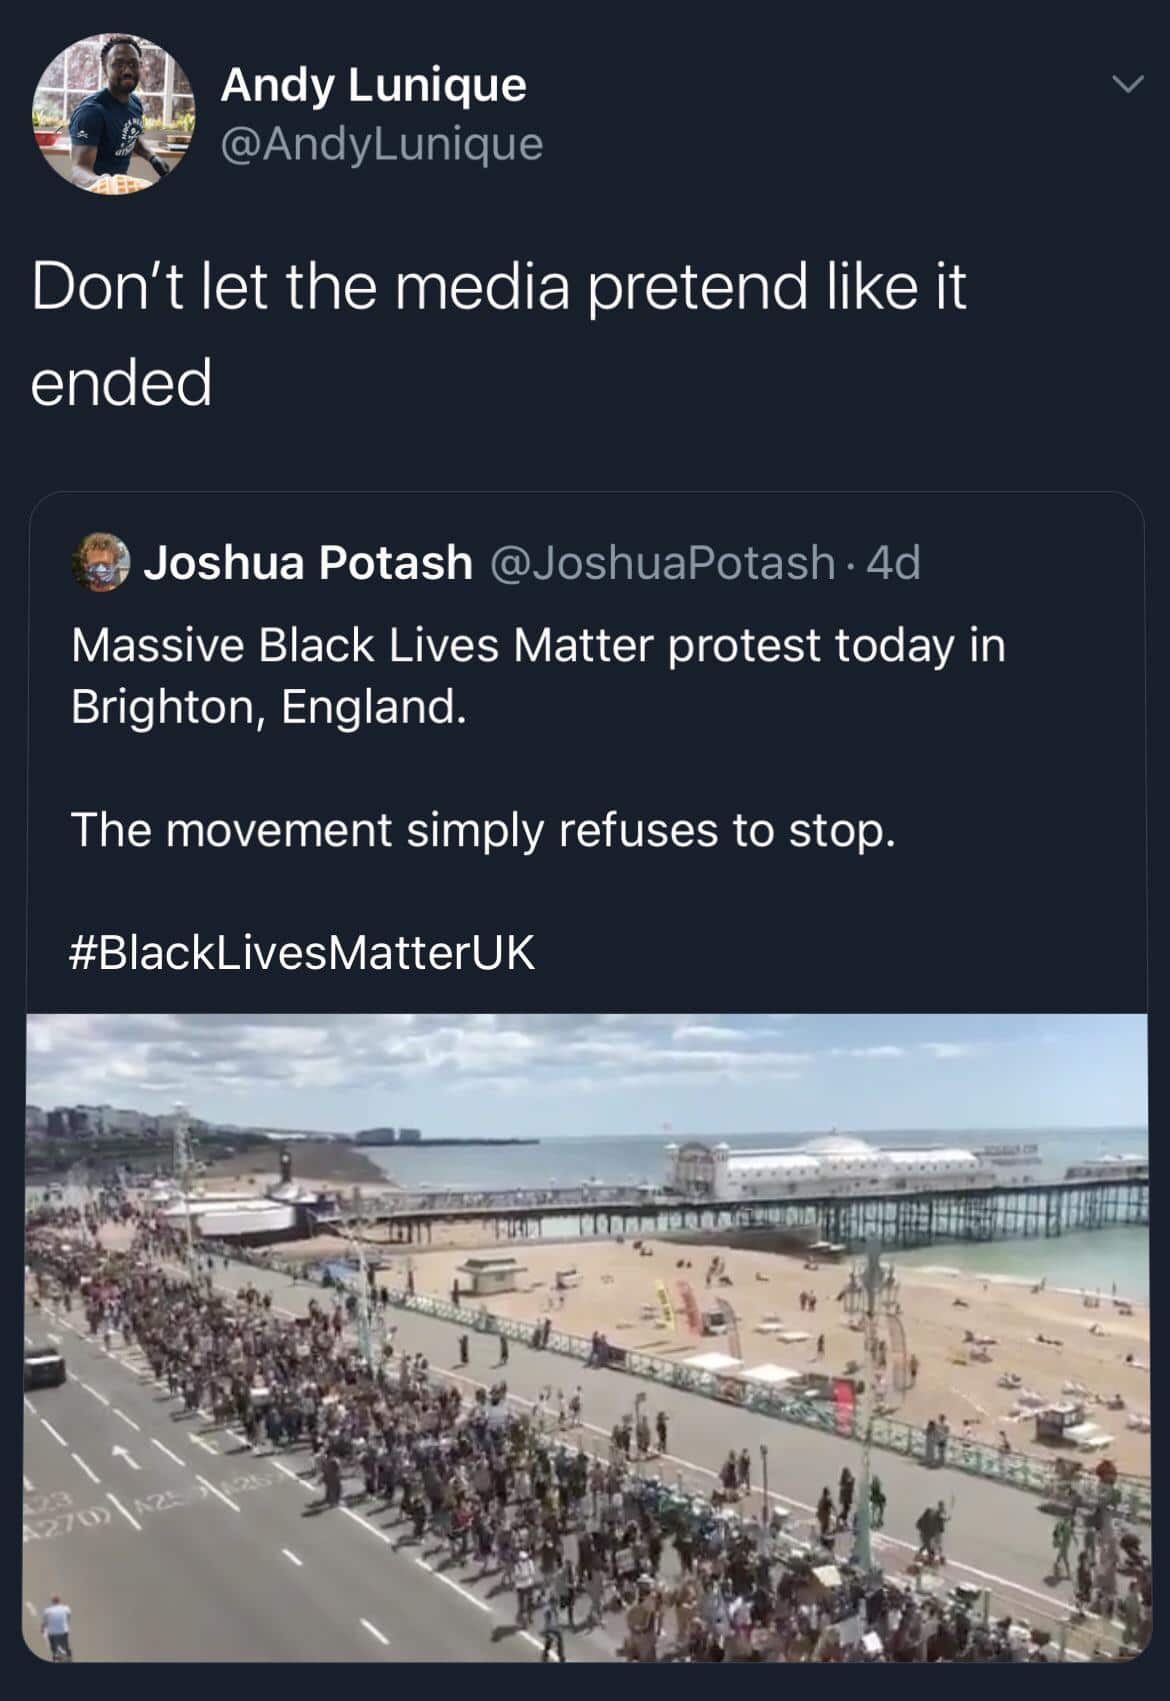 Tweets, Malcolm, UK, COVID, British, Brighton Black Twitter Memes Tweets, Malcolm, UK, COVID, British, Brighton text: Andy Lunique , @AndyLunique Don't let the media pretend like it ended Joshua Potash @JoshuaPotash 4d Massive Black Lives Matter protest today in Brighton, England. The movement simply refuses to stop. #BlackLivesMatterUK 